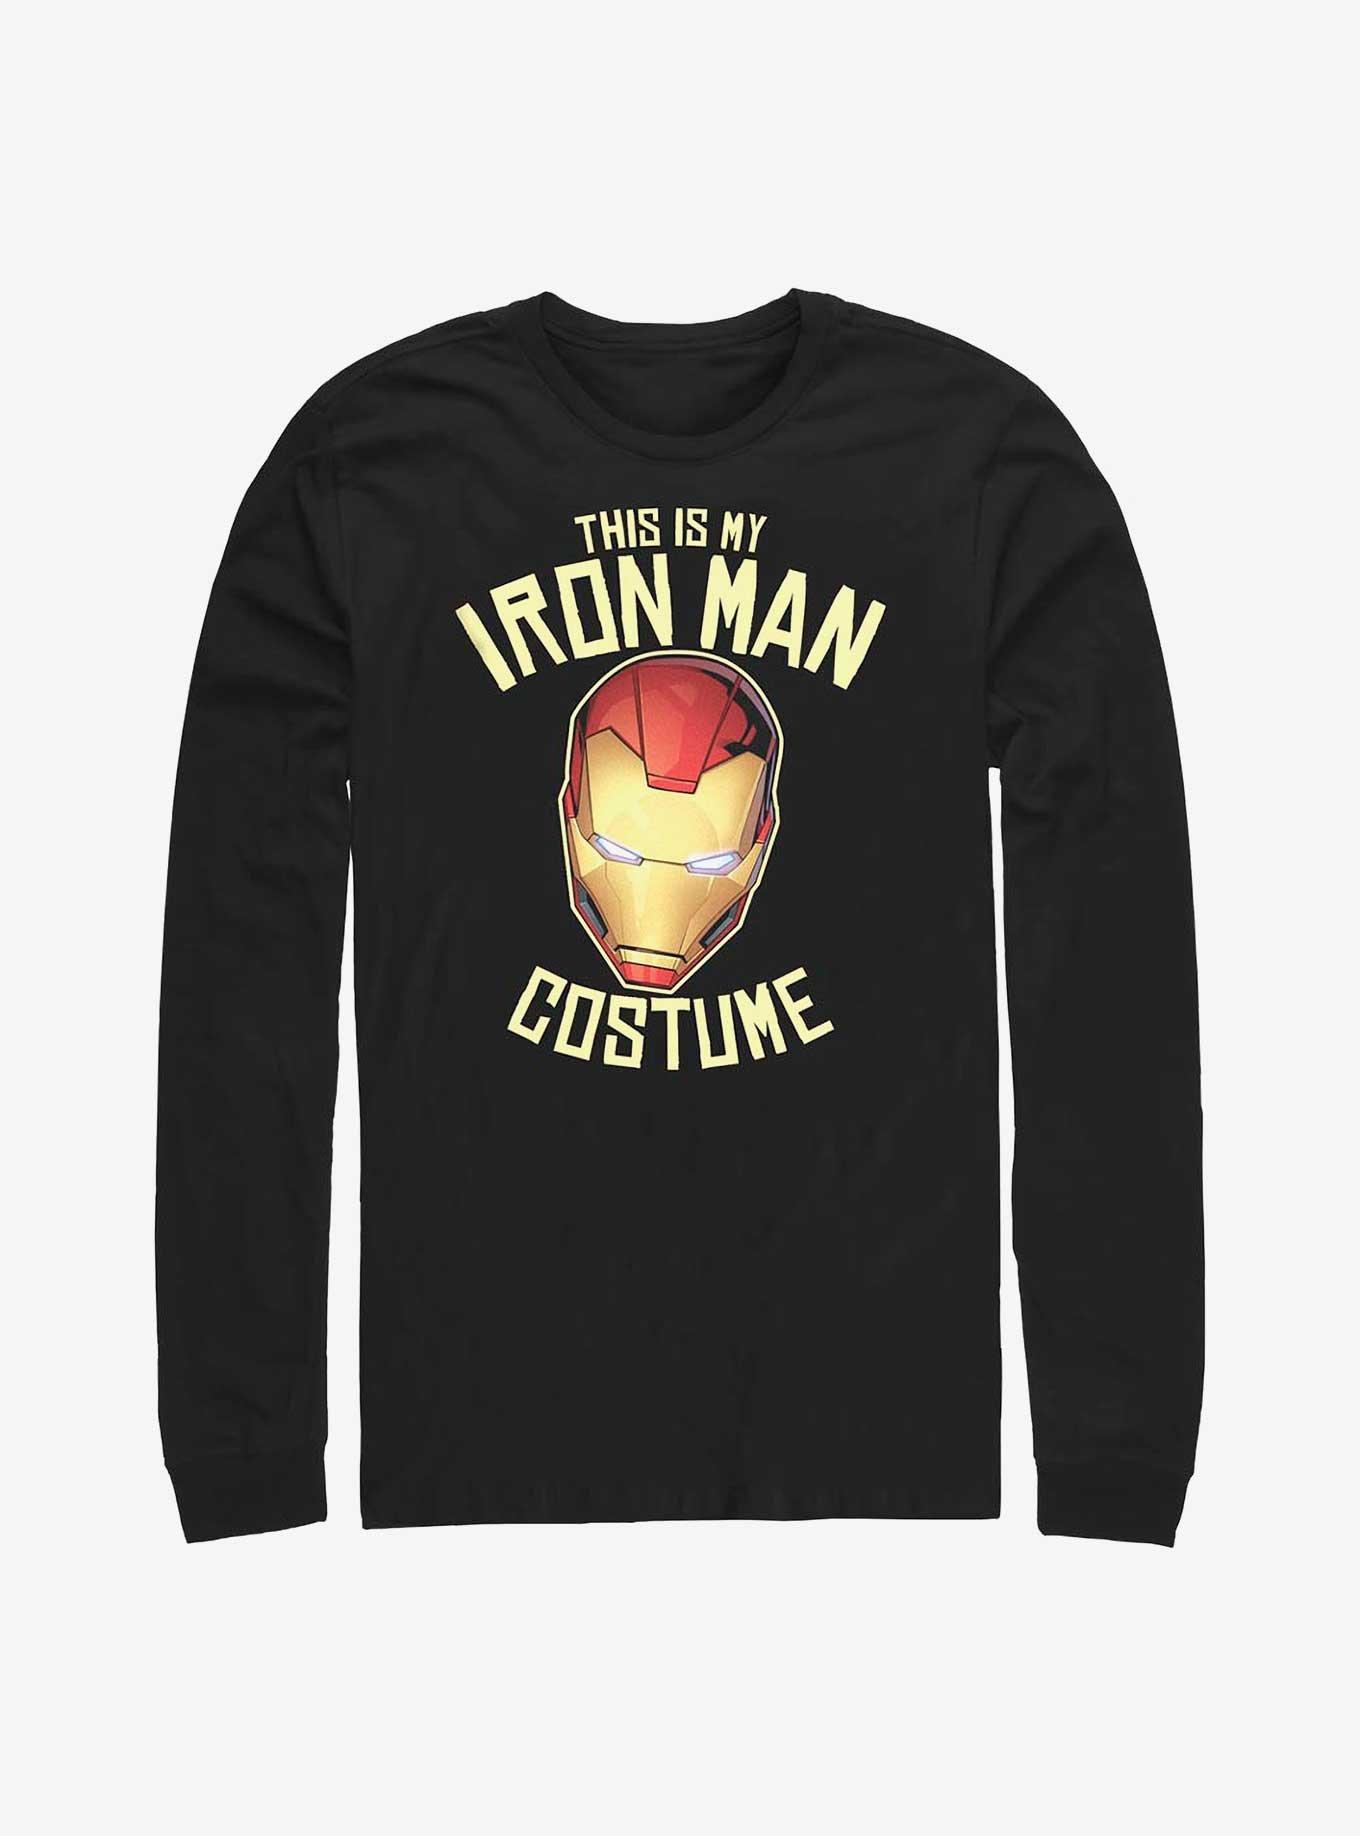 Marvel Iron Man This Is My Costume Long-Sleeve T-Shirt, BLACK, hi-res